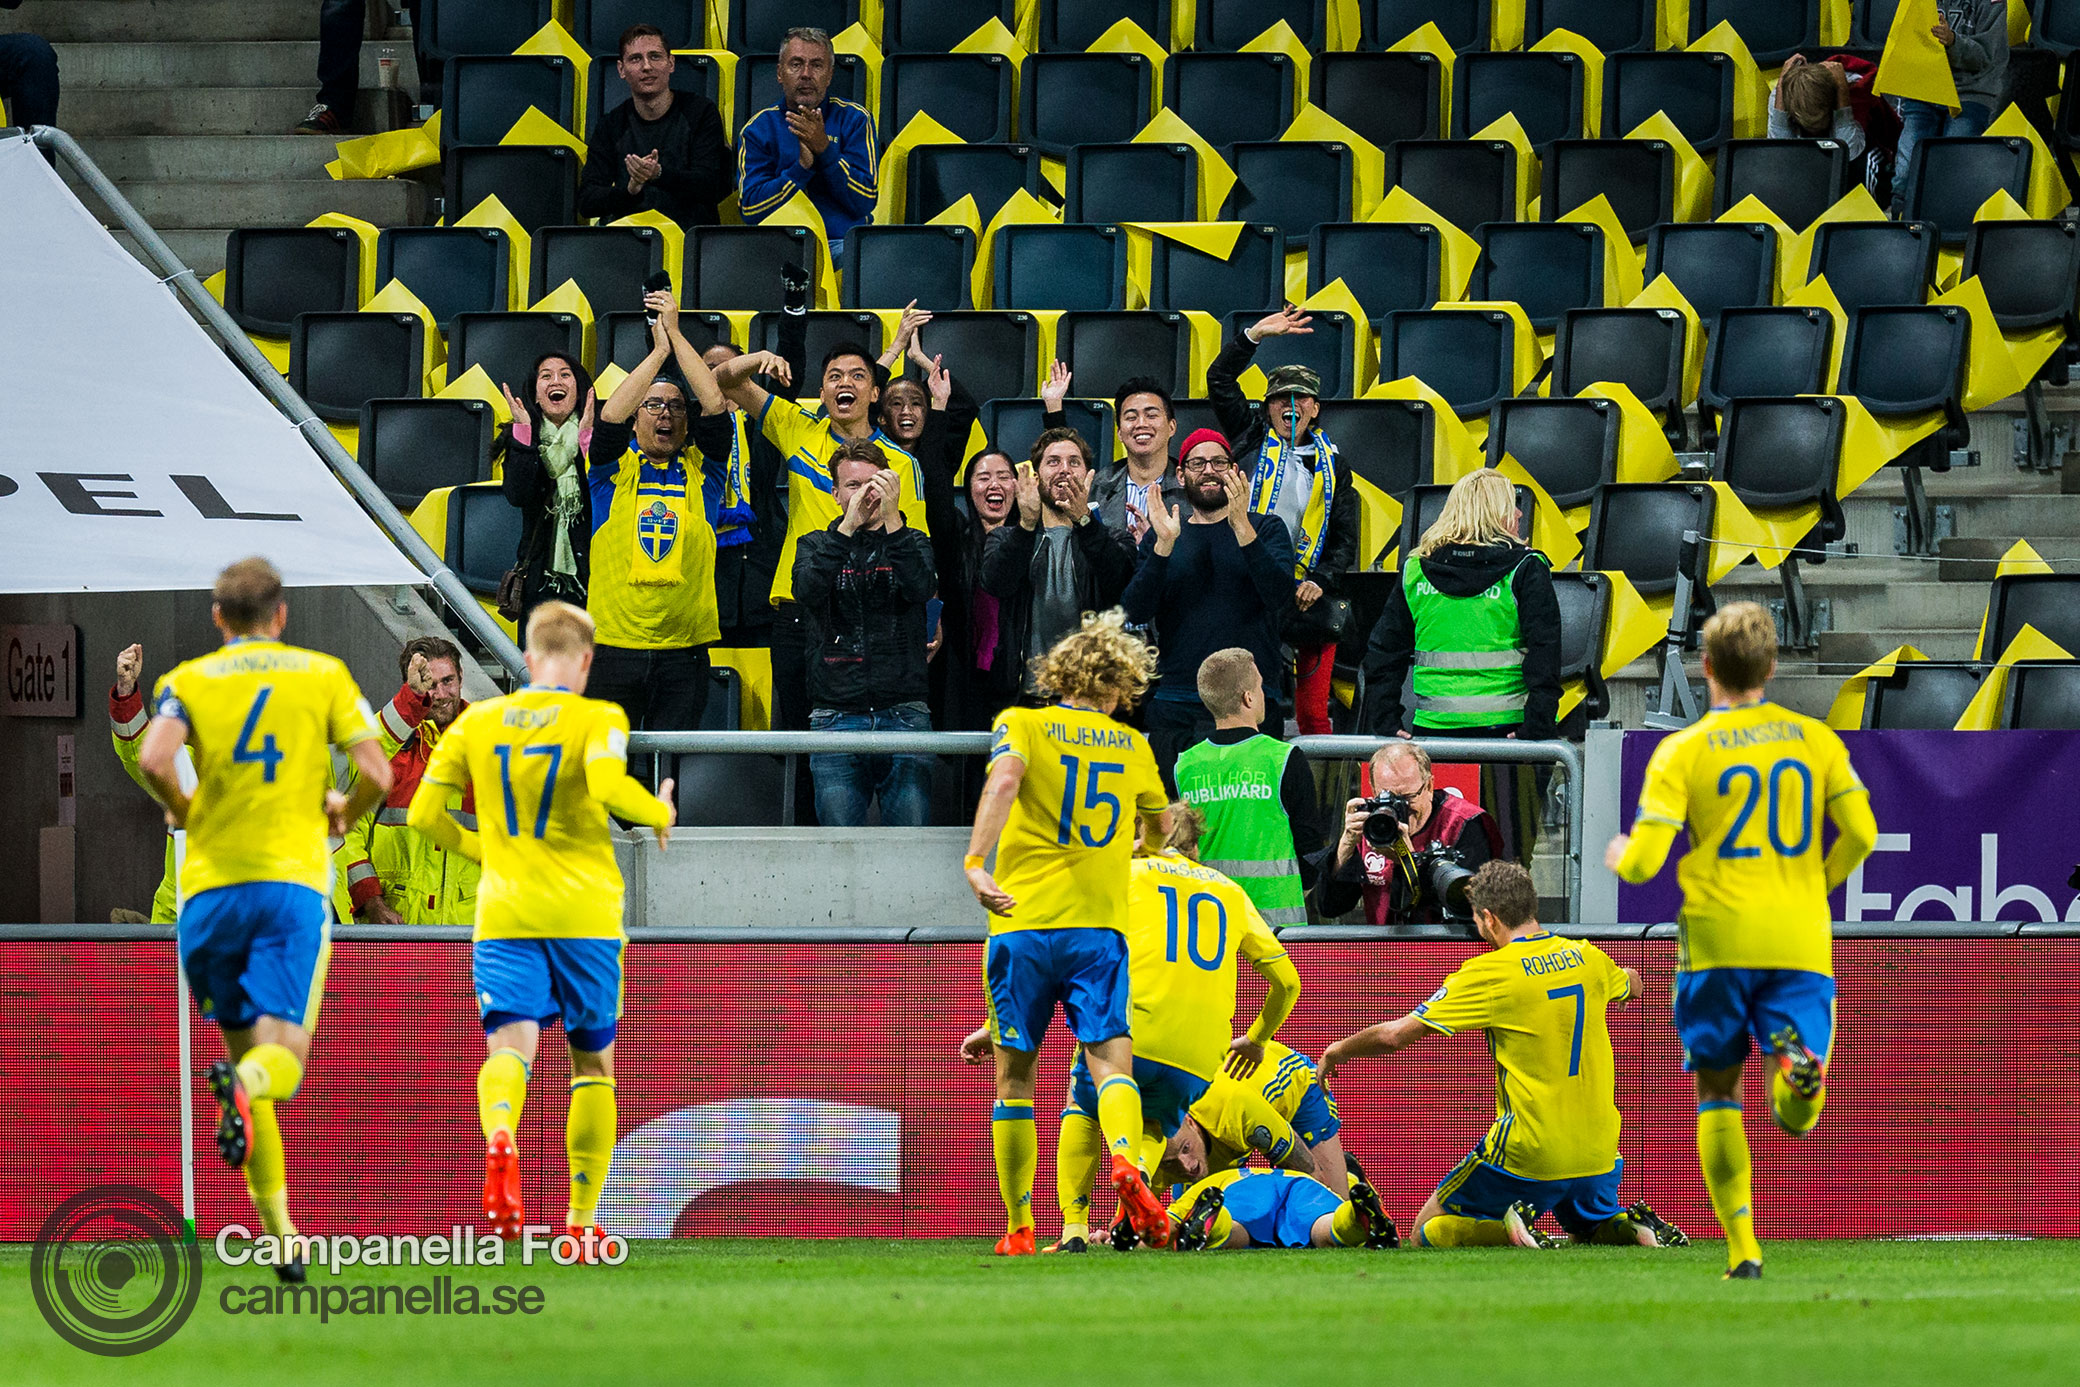 Sweden steals a point against the Netherlands - Michael Campanella Photography